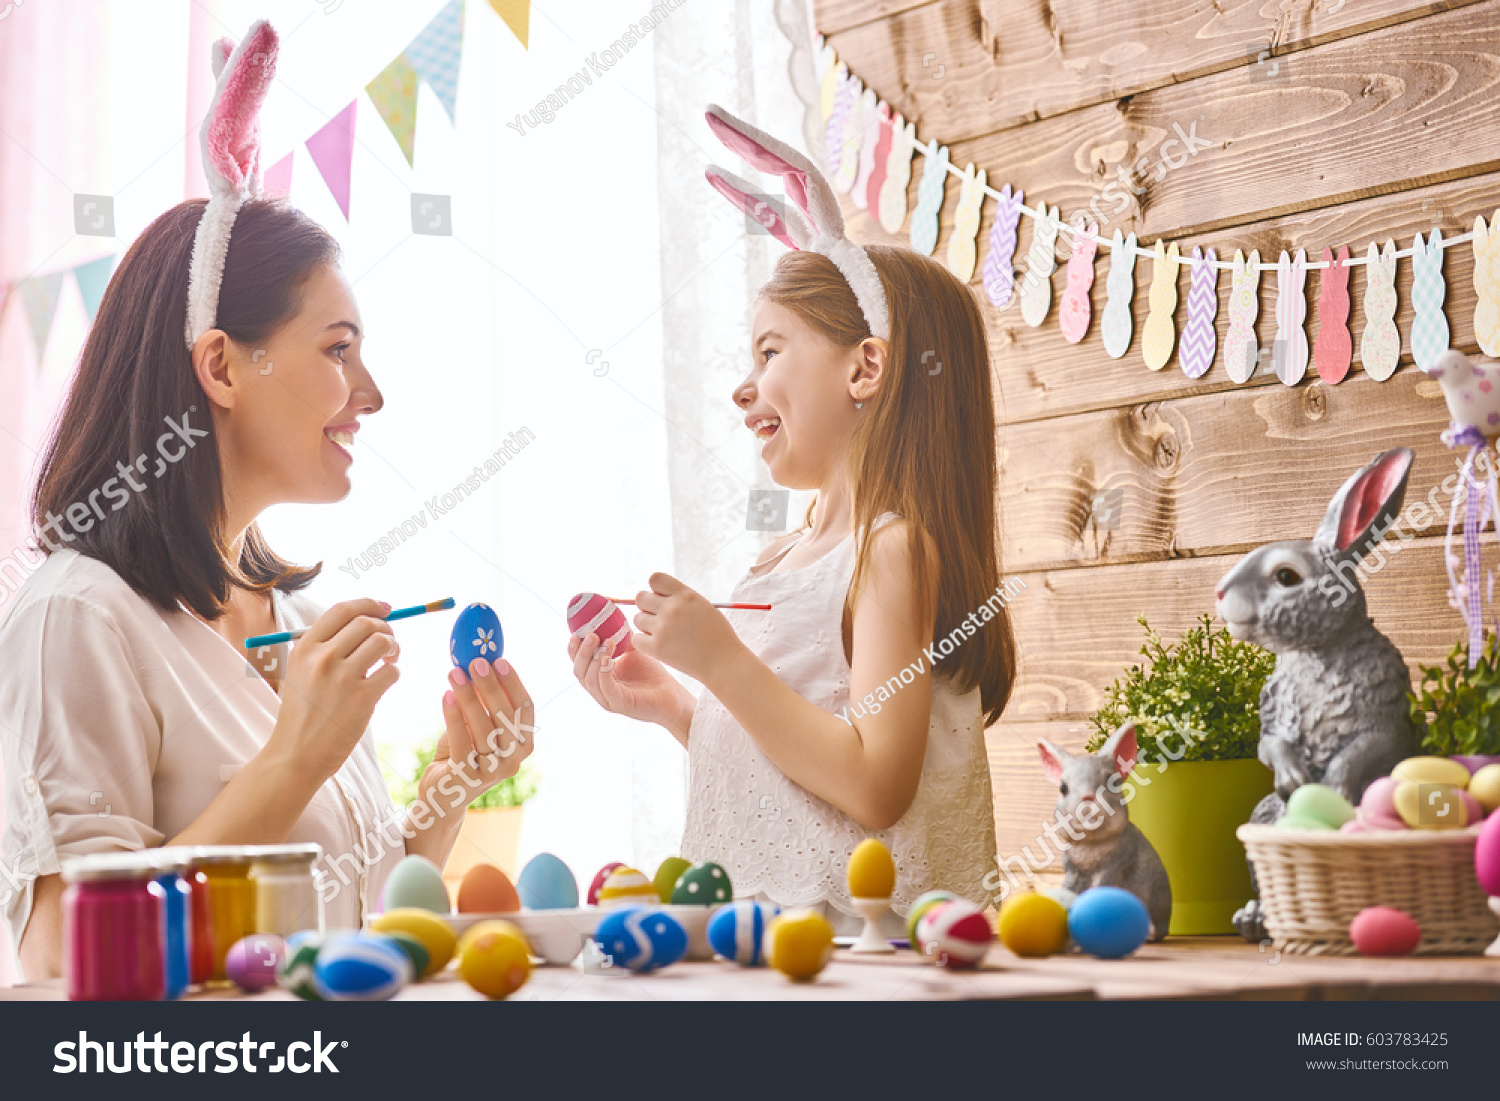 Mother and her daughter painting eggs. Happy family preparing for Easter. Cute little child girl wearing bunny ears. #603783425